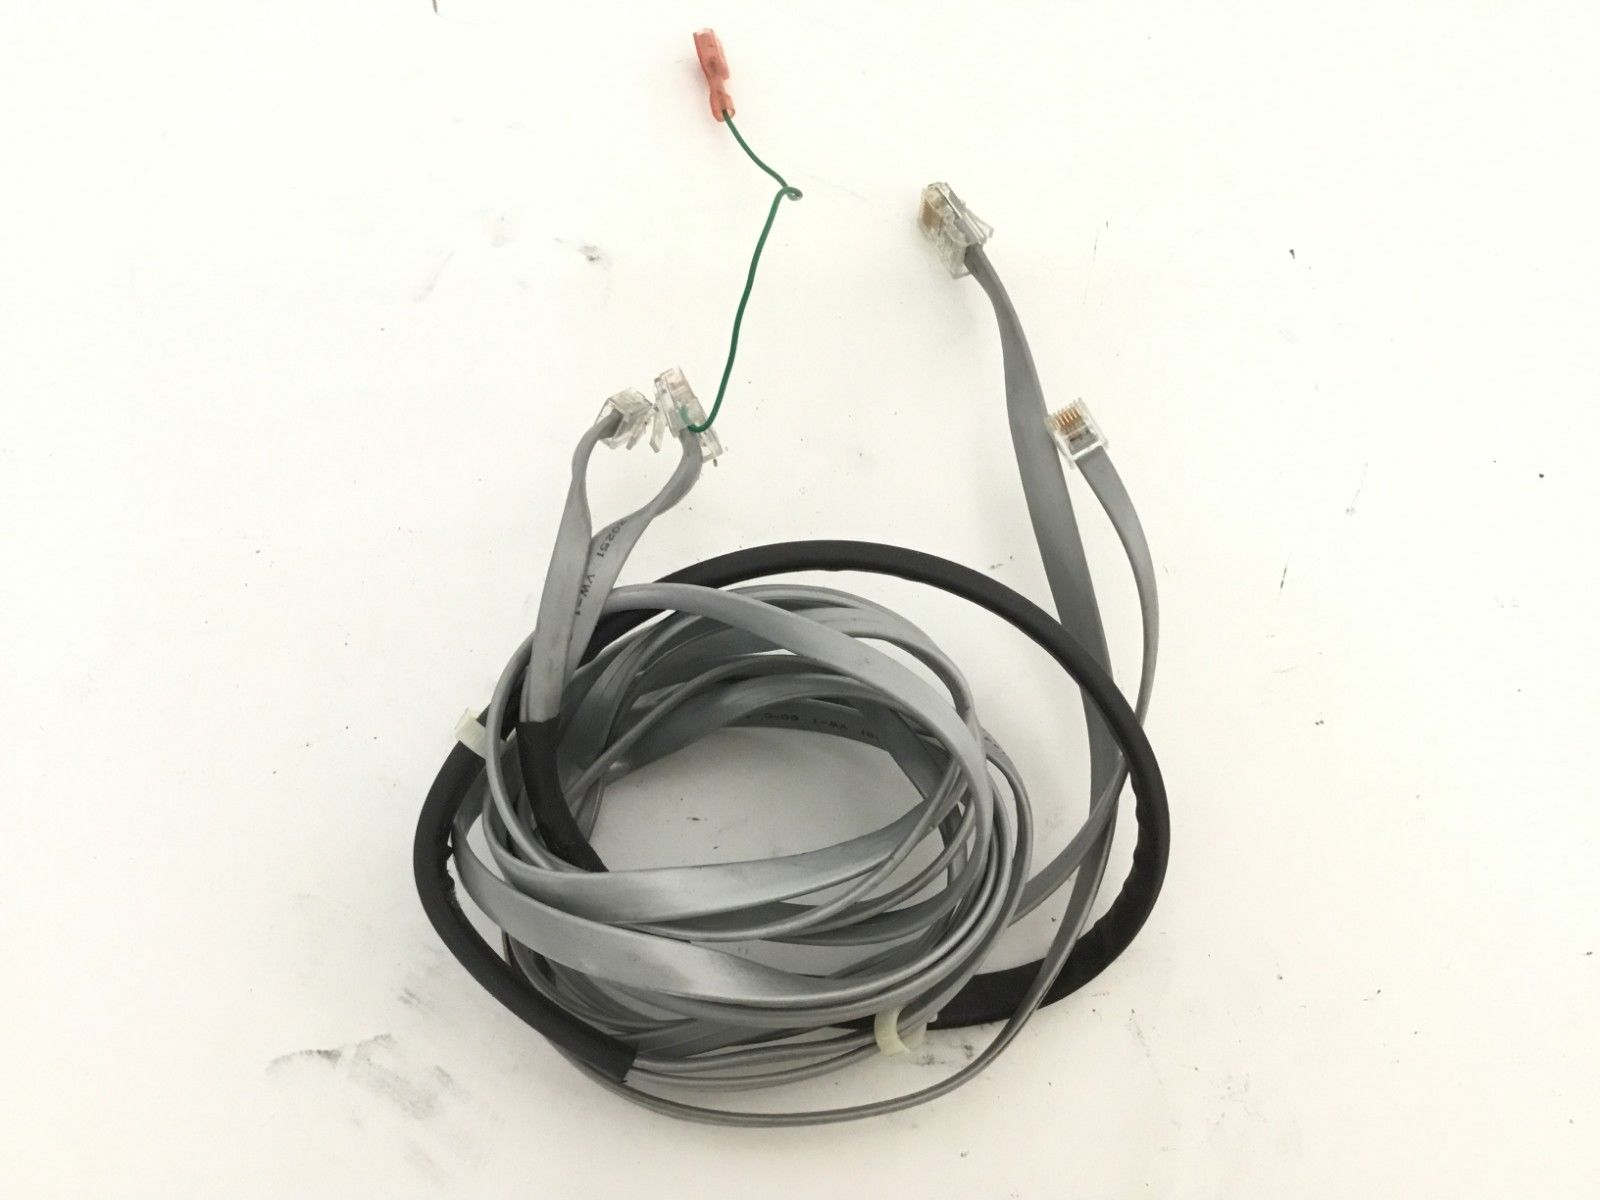 True Fitness Residential Treadmill Data Cable OEM Interface Wire Harness (Used)